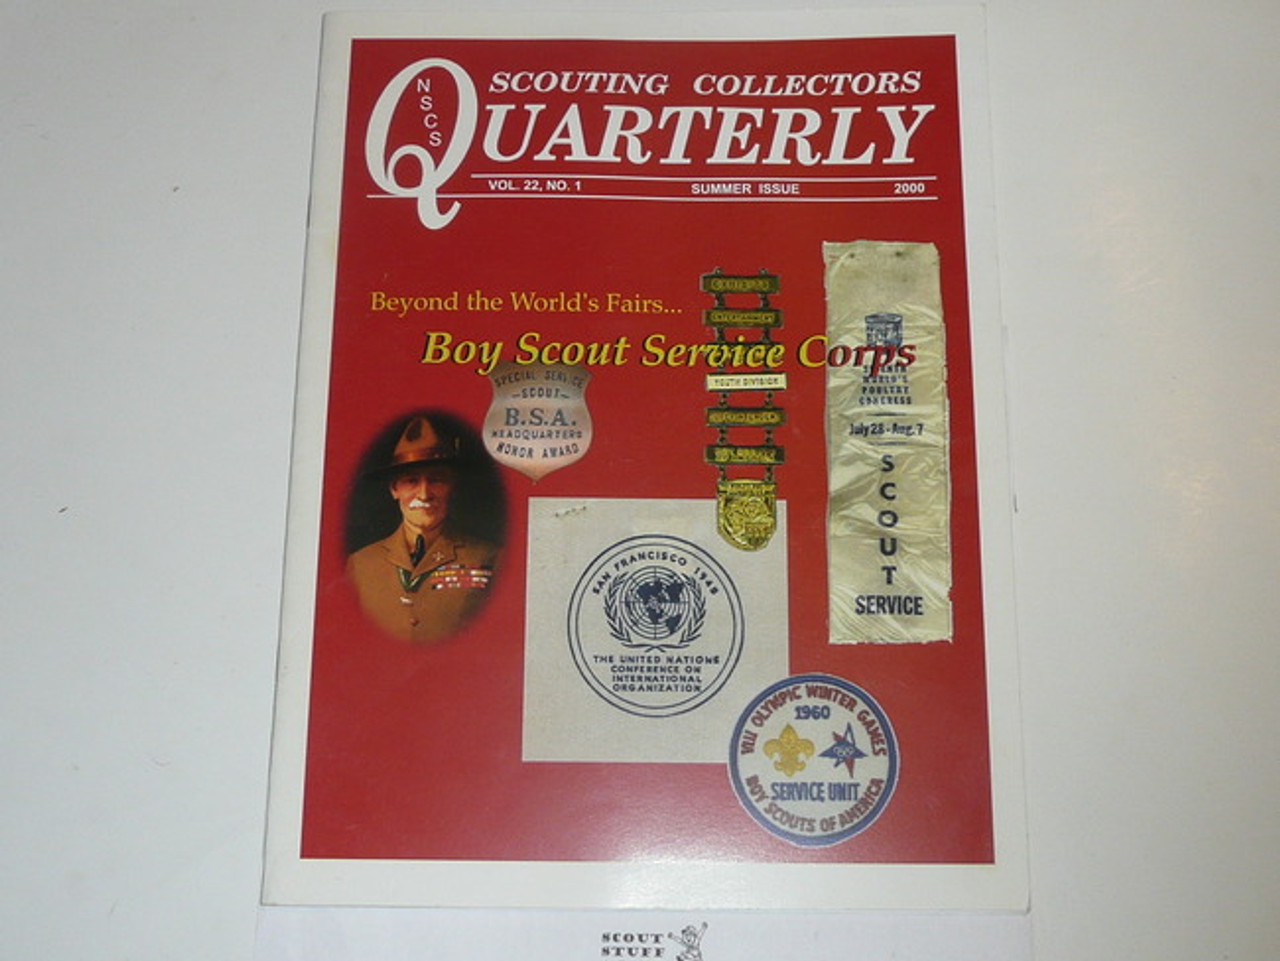 Scouting Collecters Quarterly Newsletter, 2000 Summer, Vol 22 #1